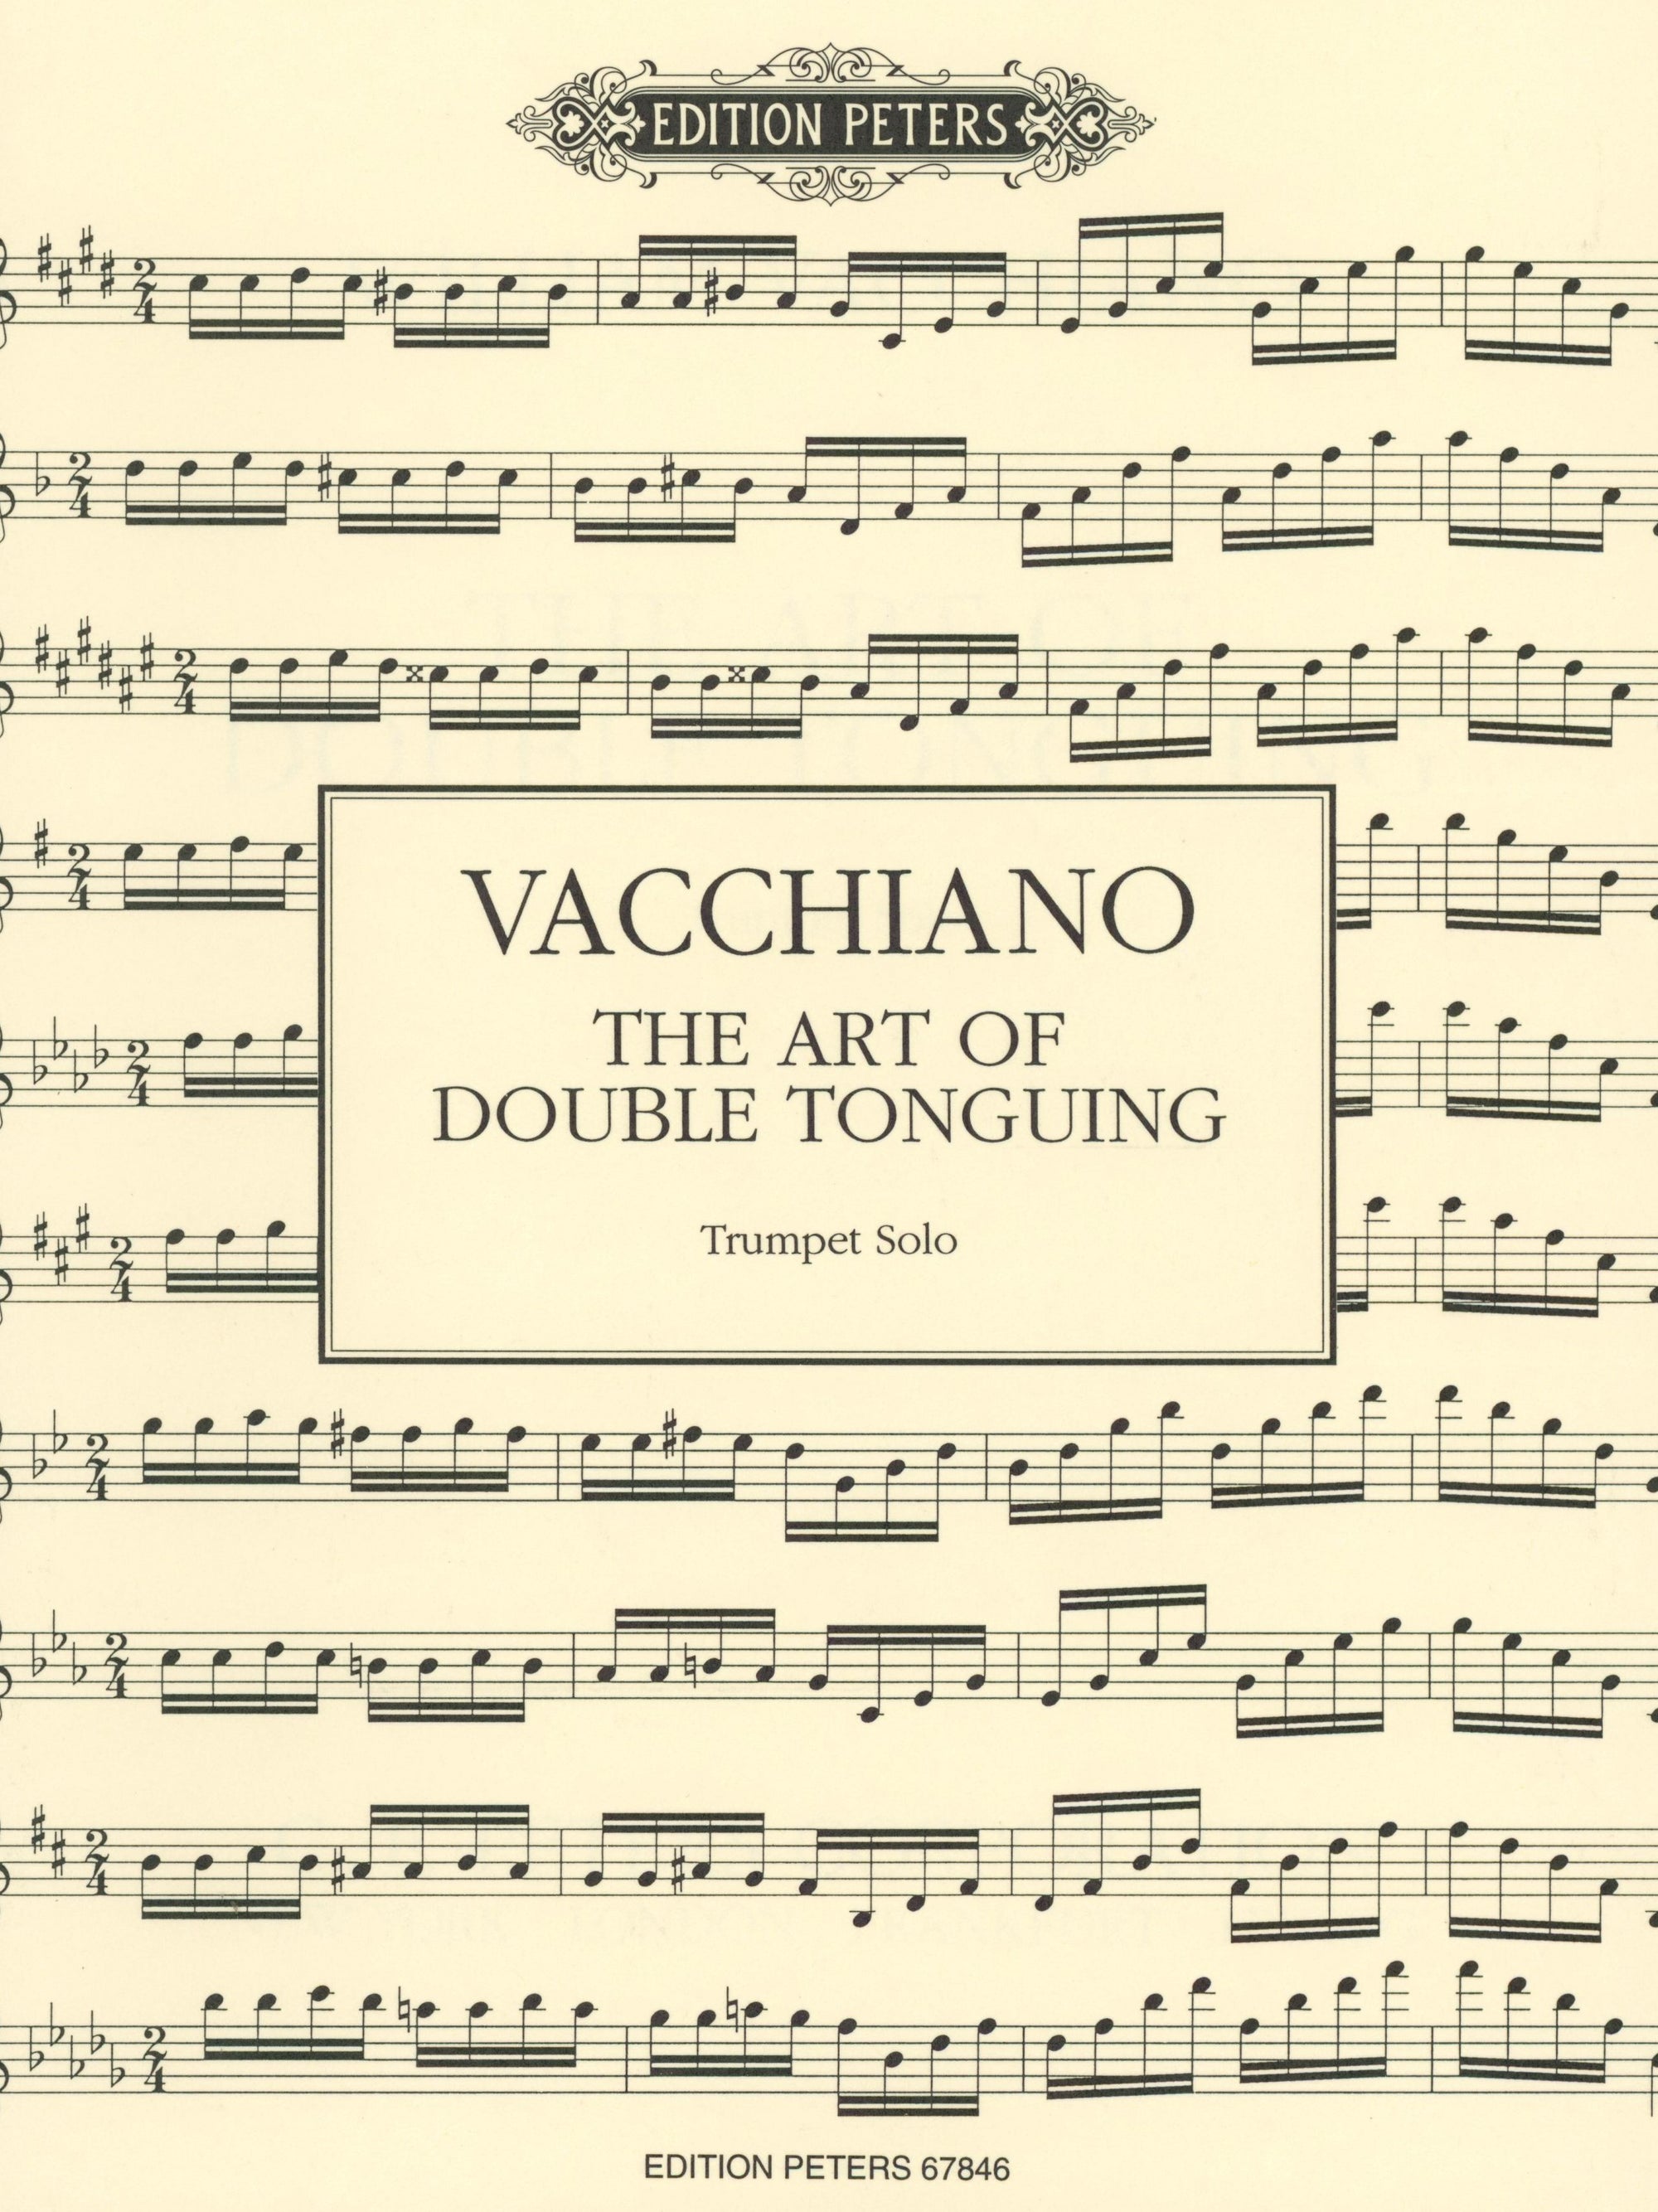 Vacchiano: The Art of Double Tonguing for Trumpet